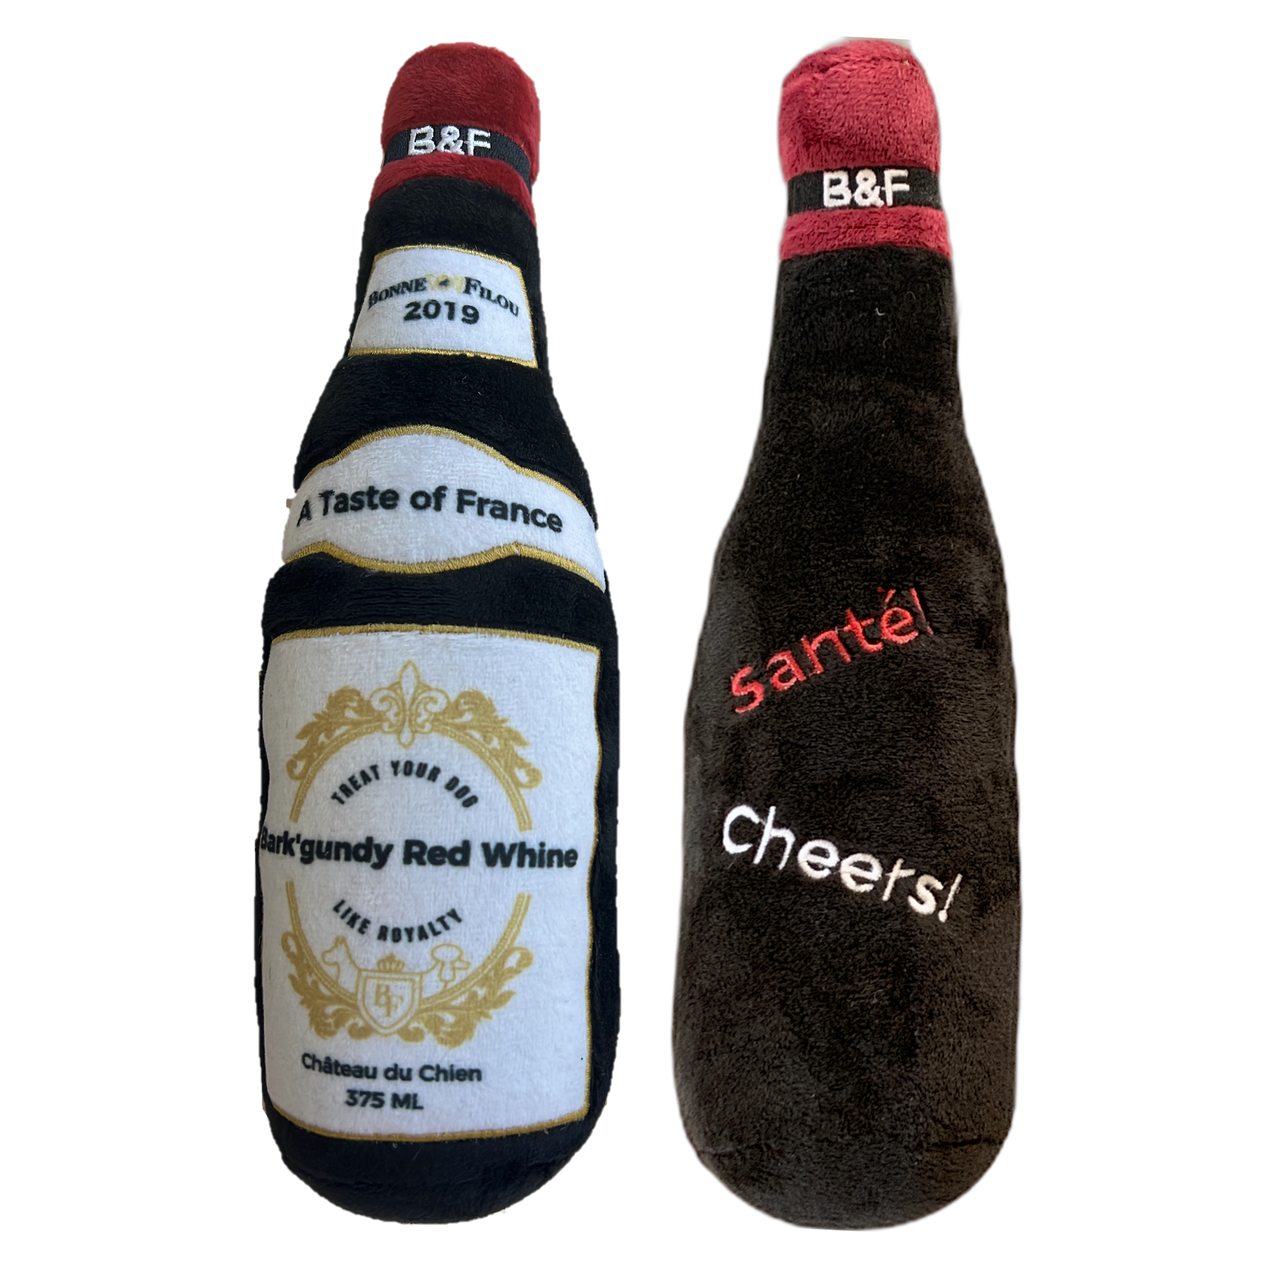 Wine Bottle Squeaky Dog Plush Toy (Bark'gundy Red Whine)